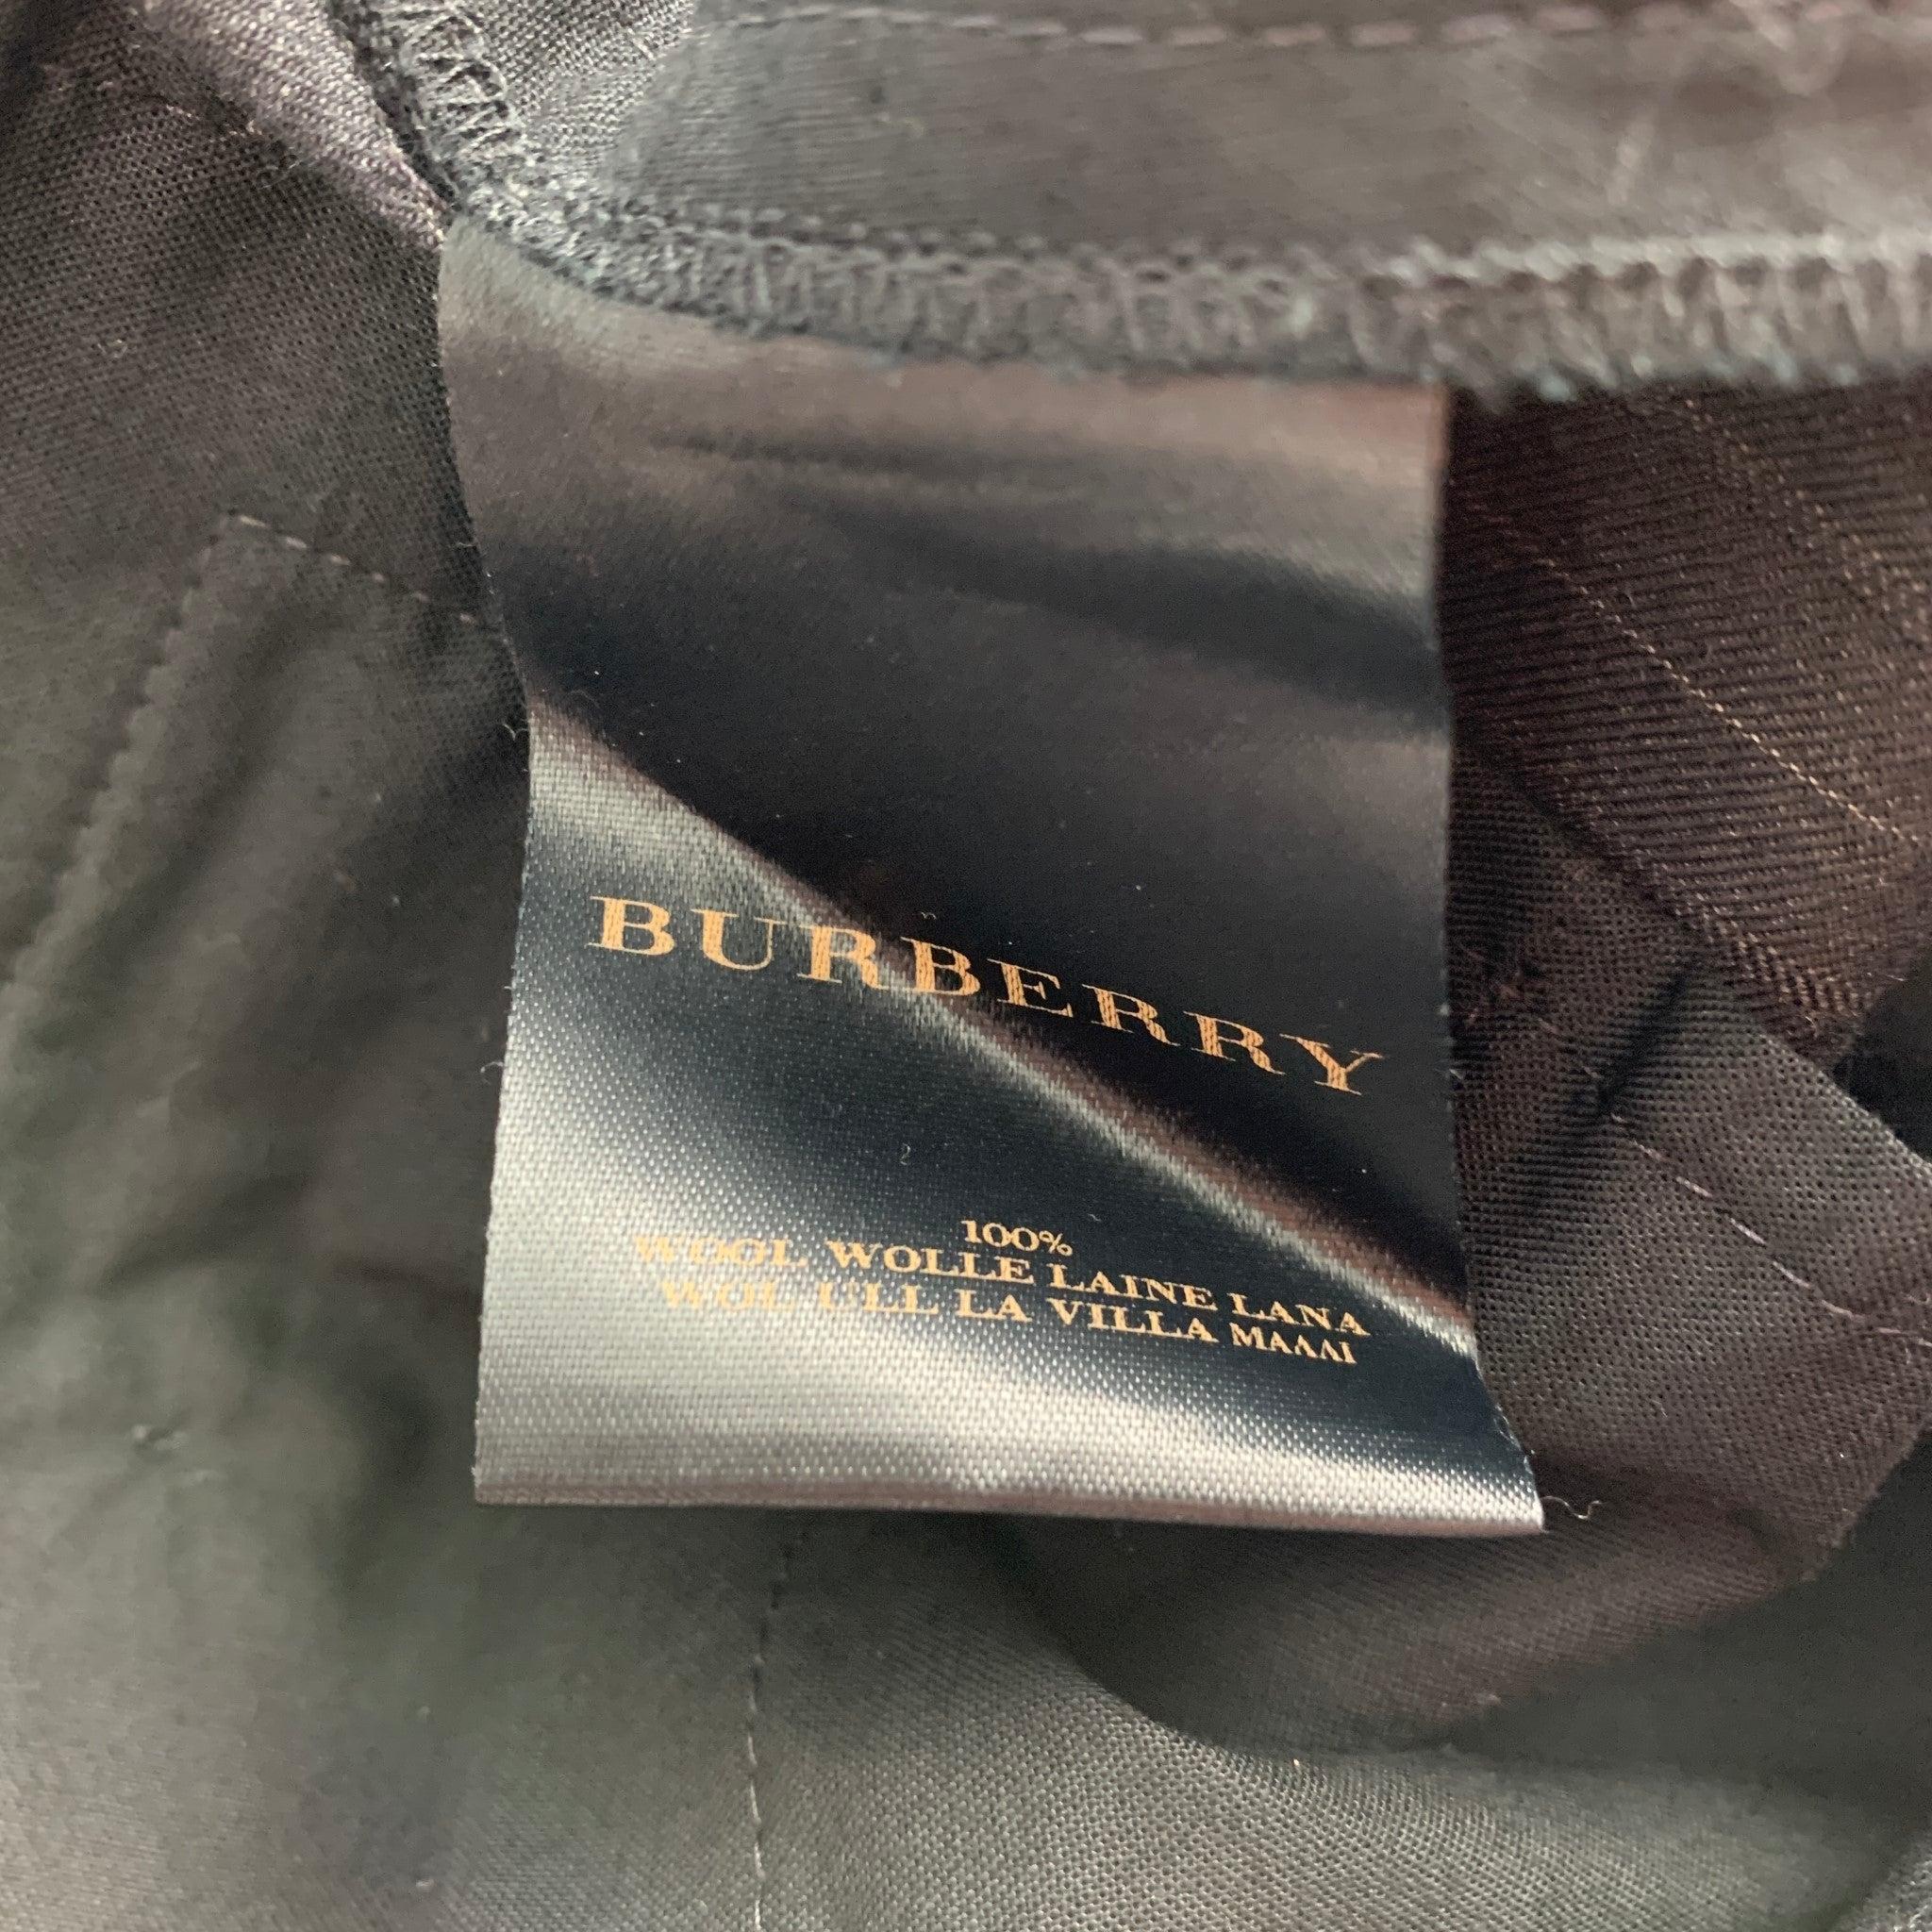 Vintage BURBERRY PRORSUM Size 32 Charcoal Grey Chalkstripe Wool Zip Dress Pants In Good Condition For Sale In San Francisco, CA